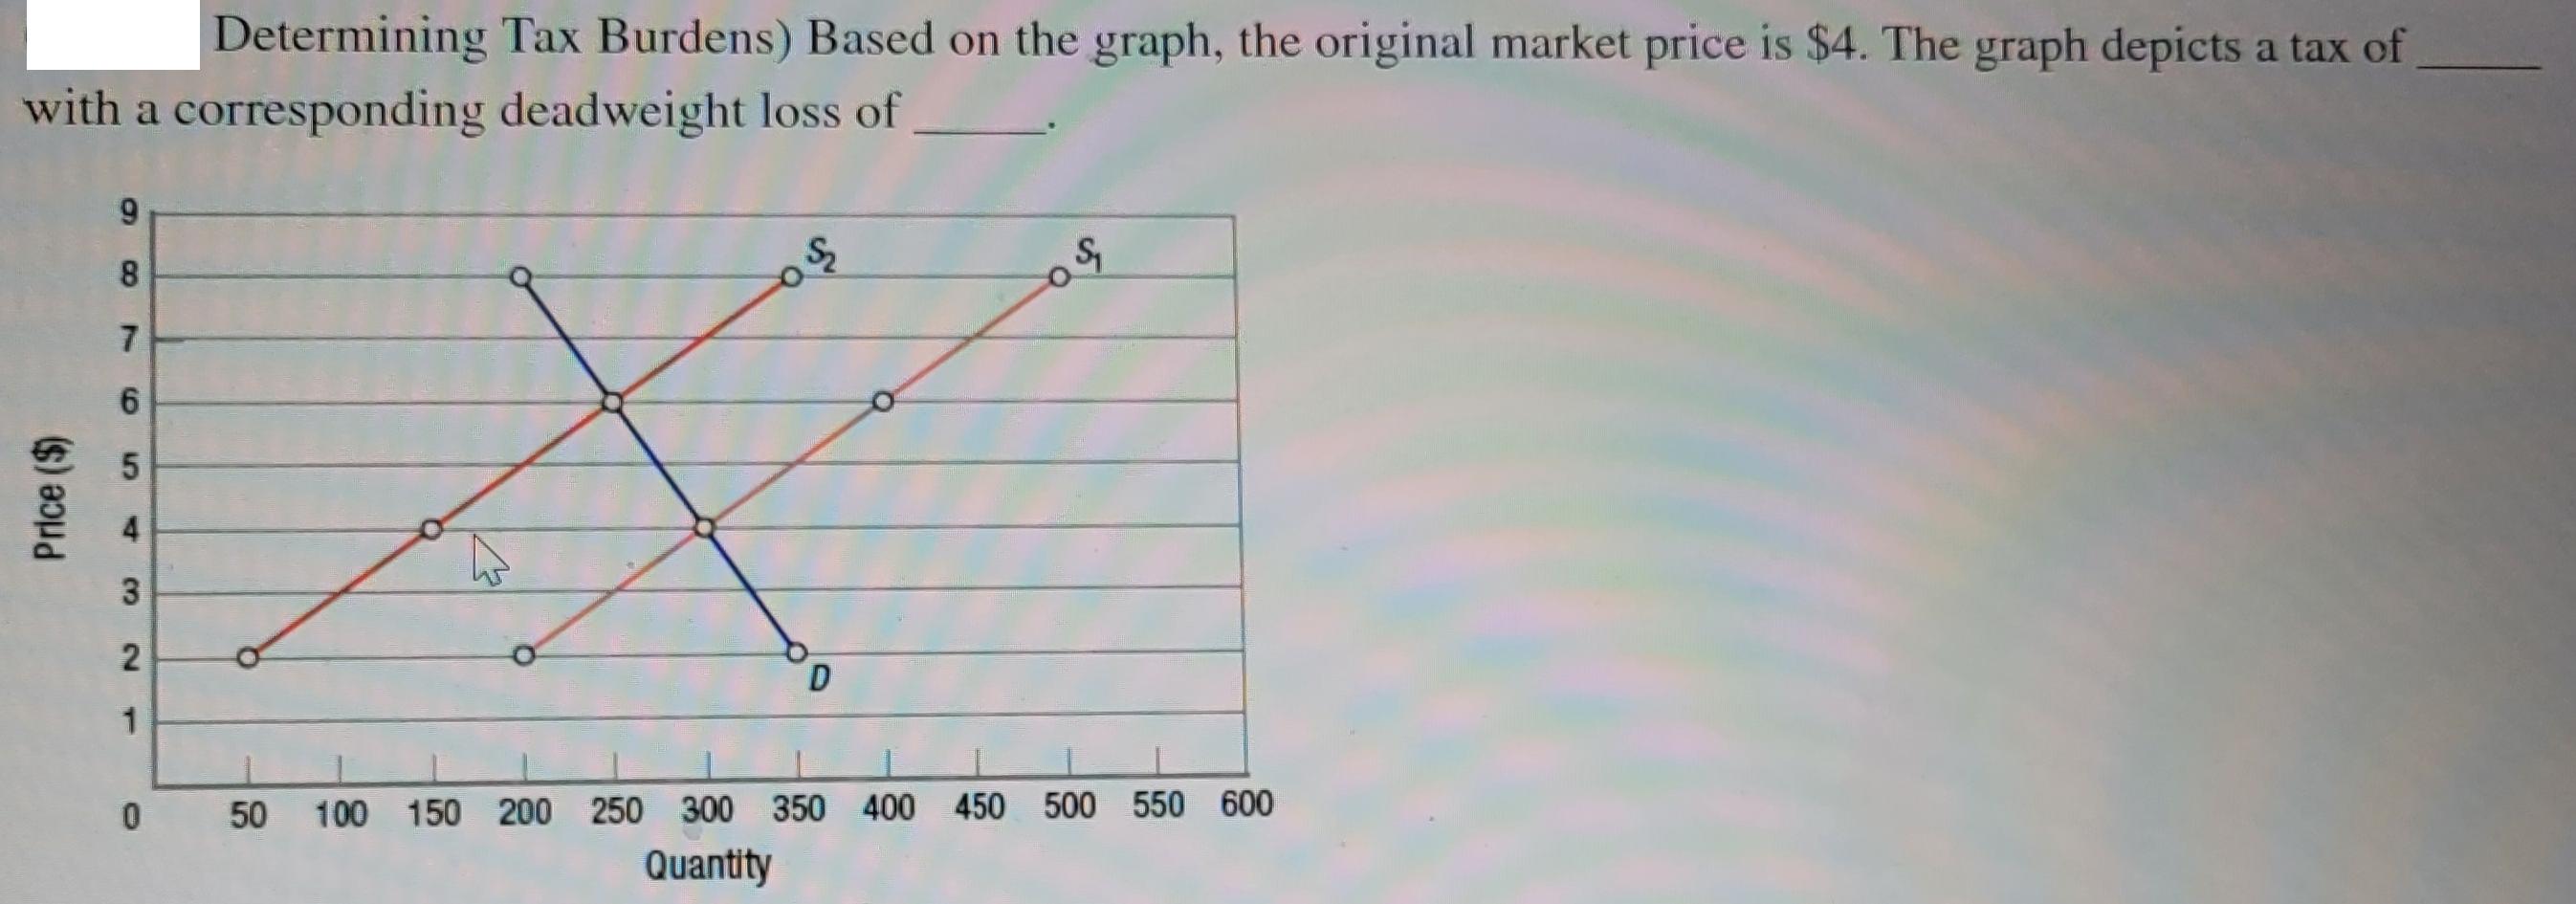 Determining Tax Burdens) Based on the graph, the original market price is $4. The graph depicts a tax of with